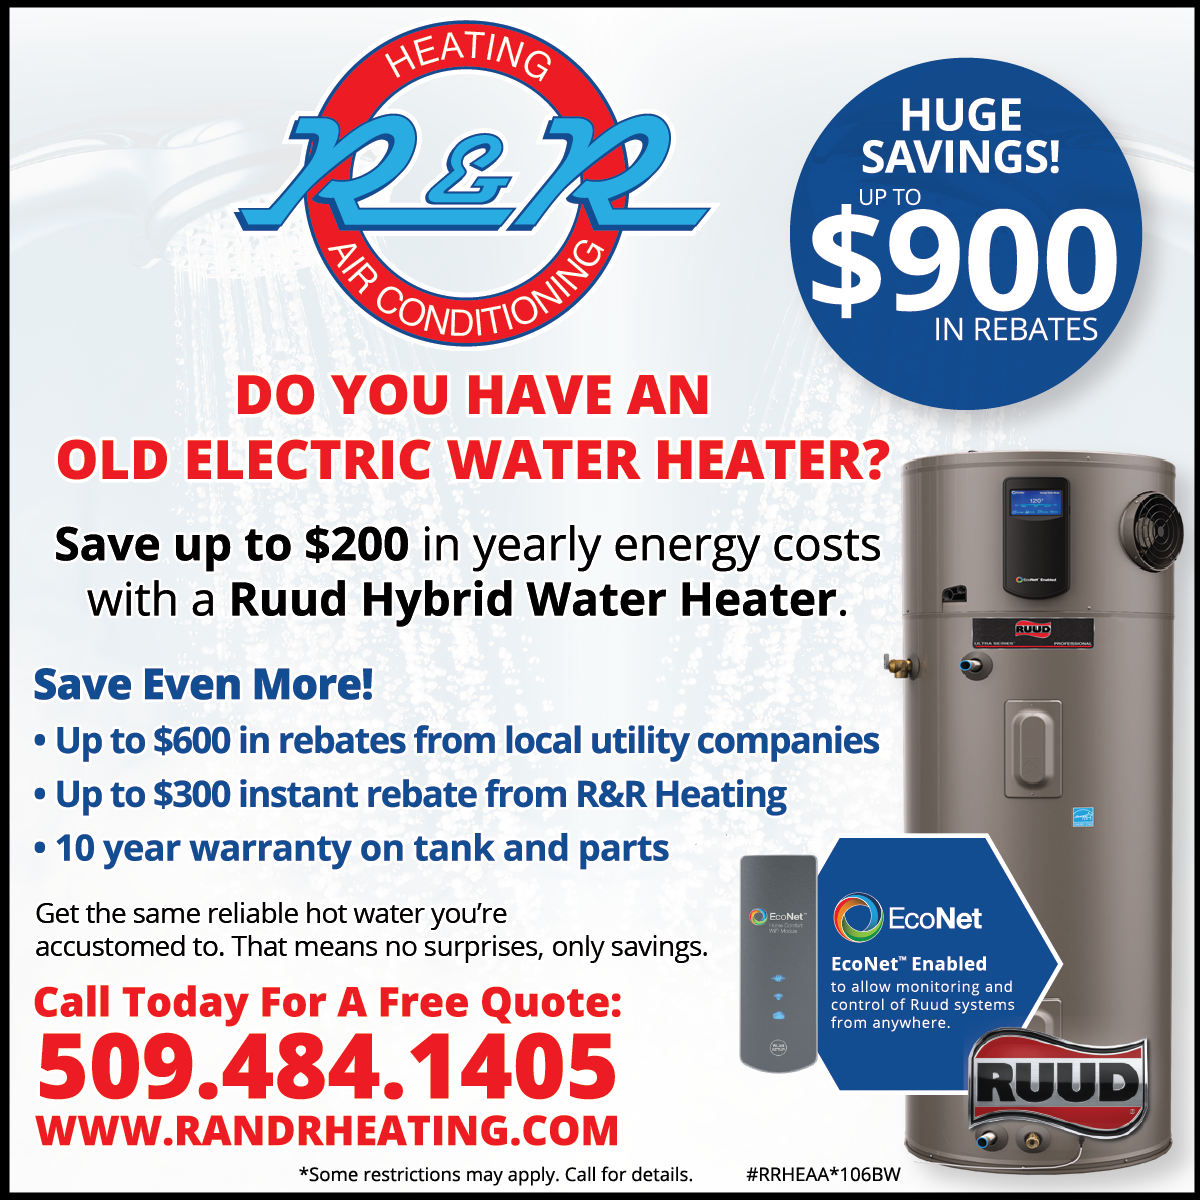 350-rebate-on-your-new-hot-water-heater-lowcountry-home-magazine